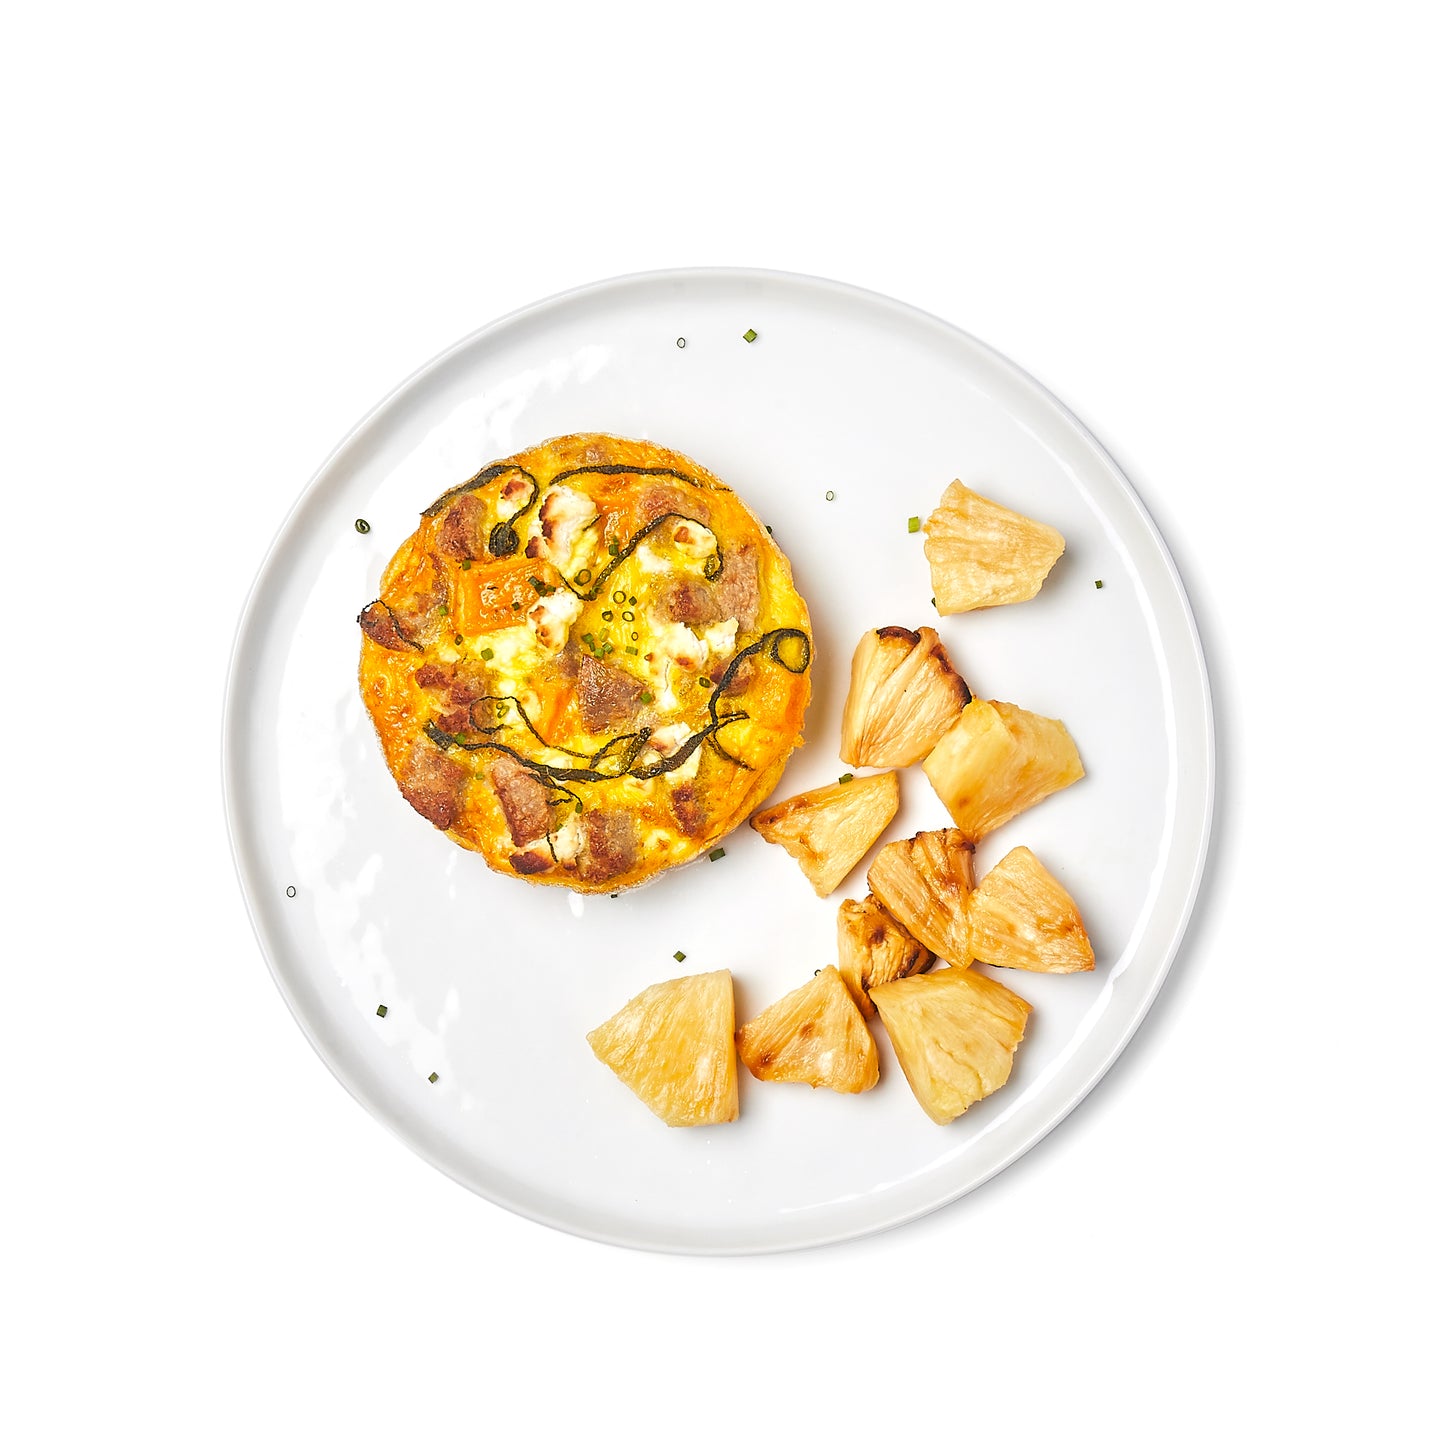 roasted butternut squash, sausage, goat cheese, and sage frittata azuluna foods Premium Pasture-Raised ready-to-eat Meals Delivery